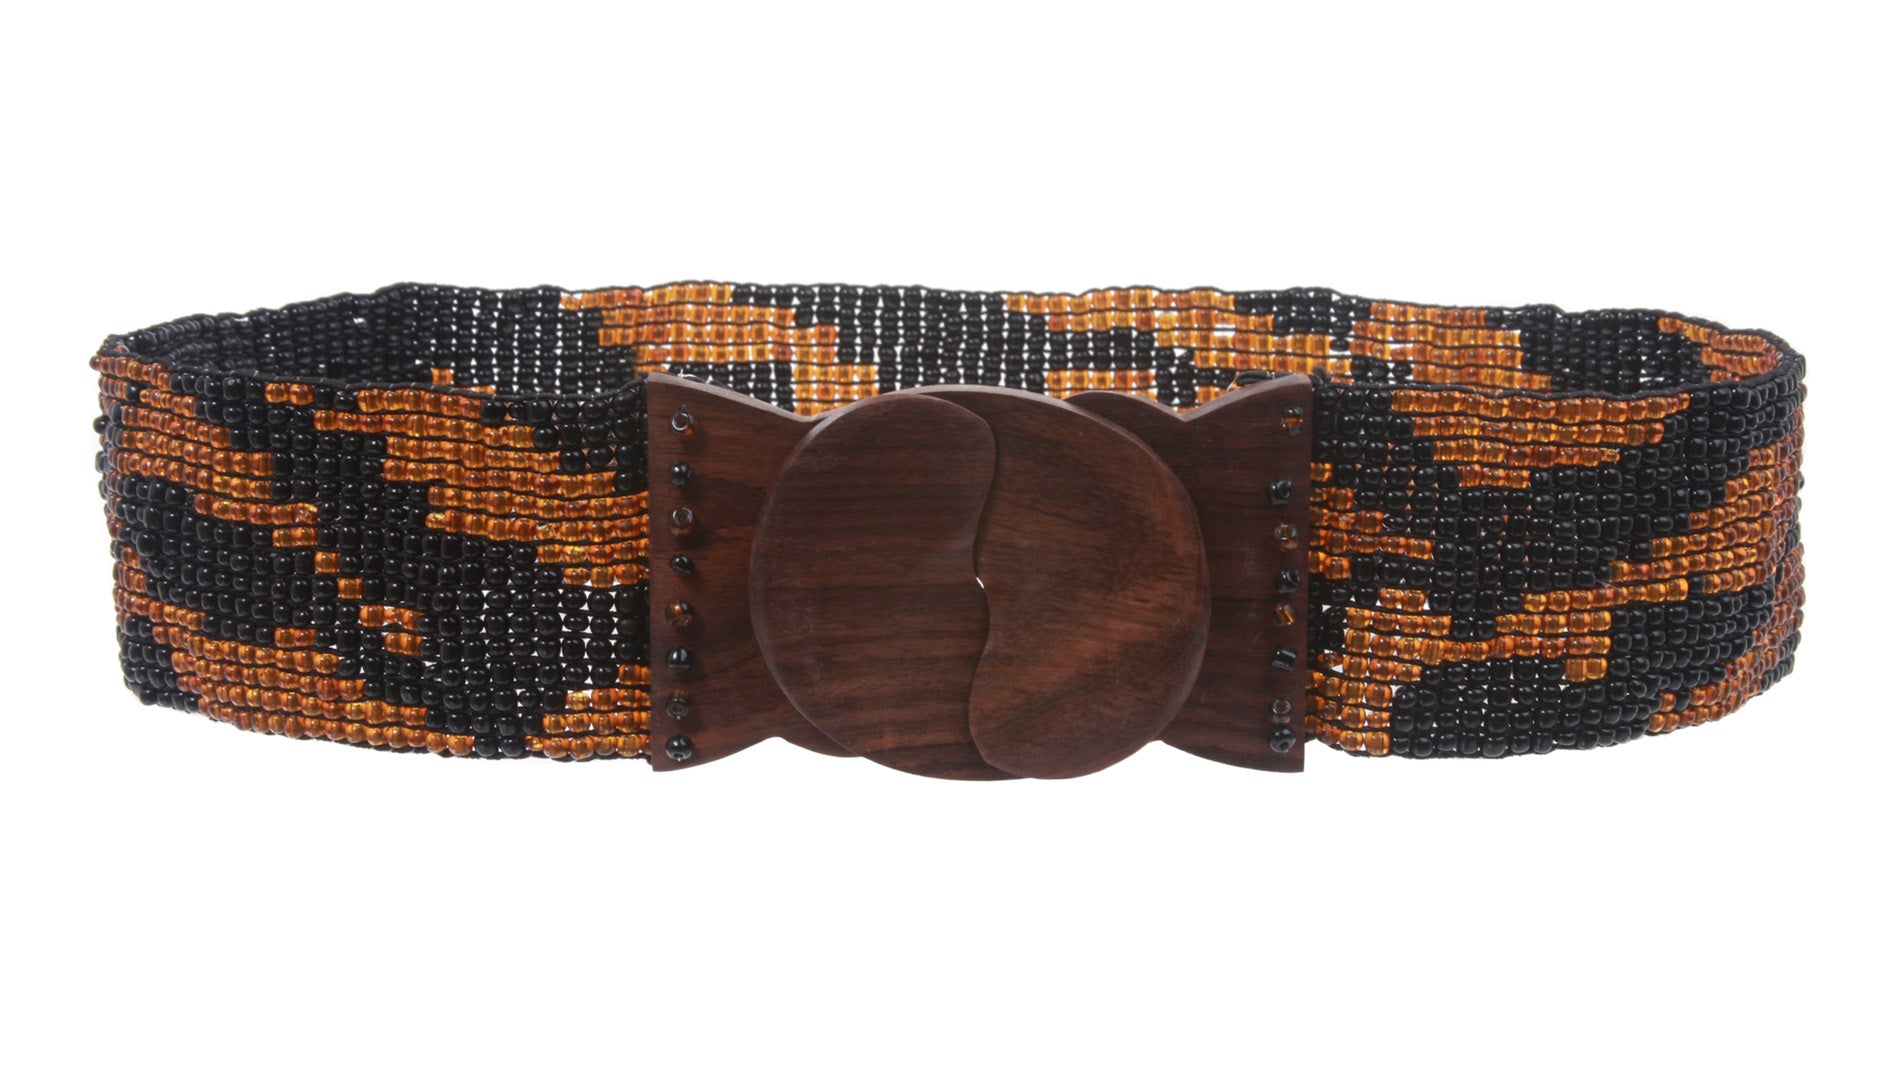 2 1/4" Beaded Stretch Belt with Polished Wood Buckle